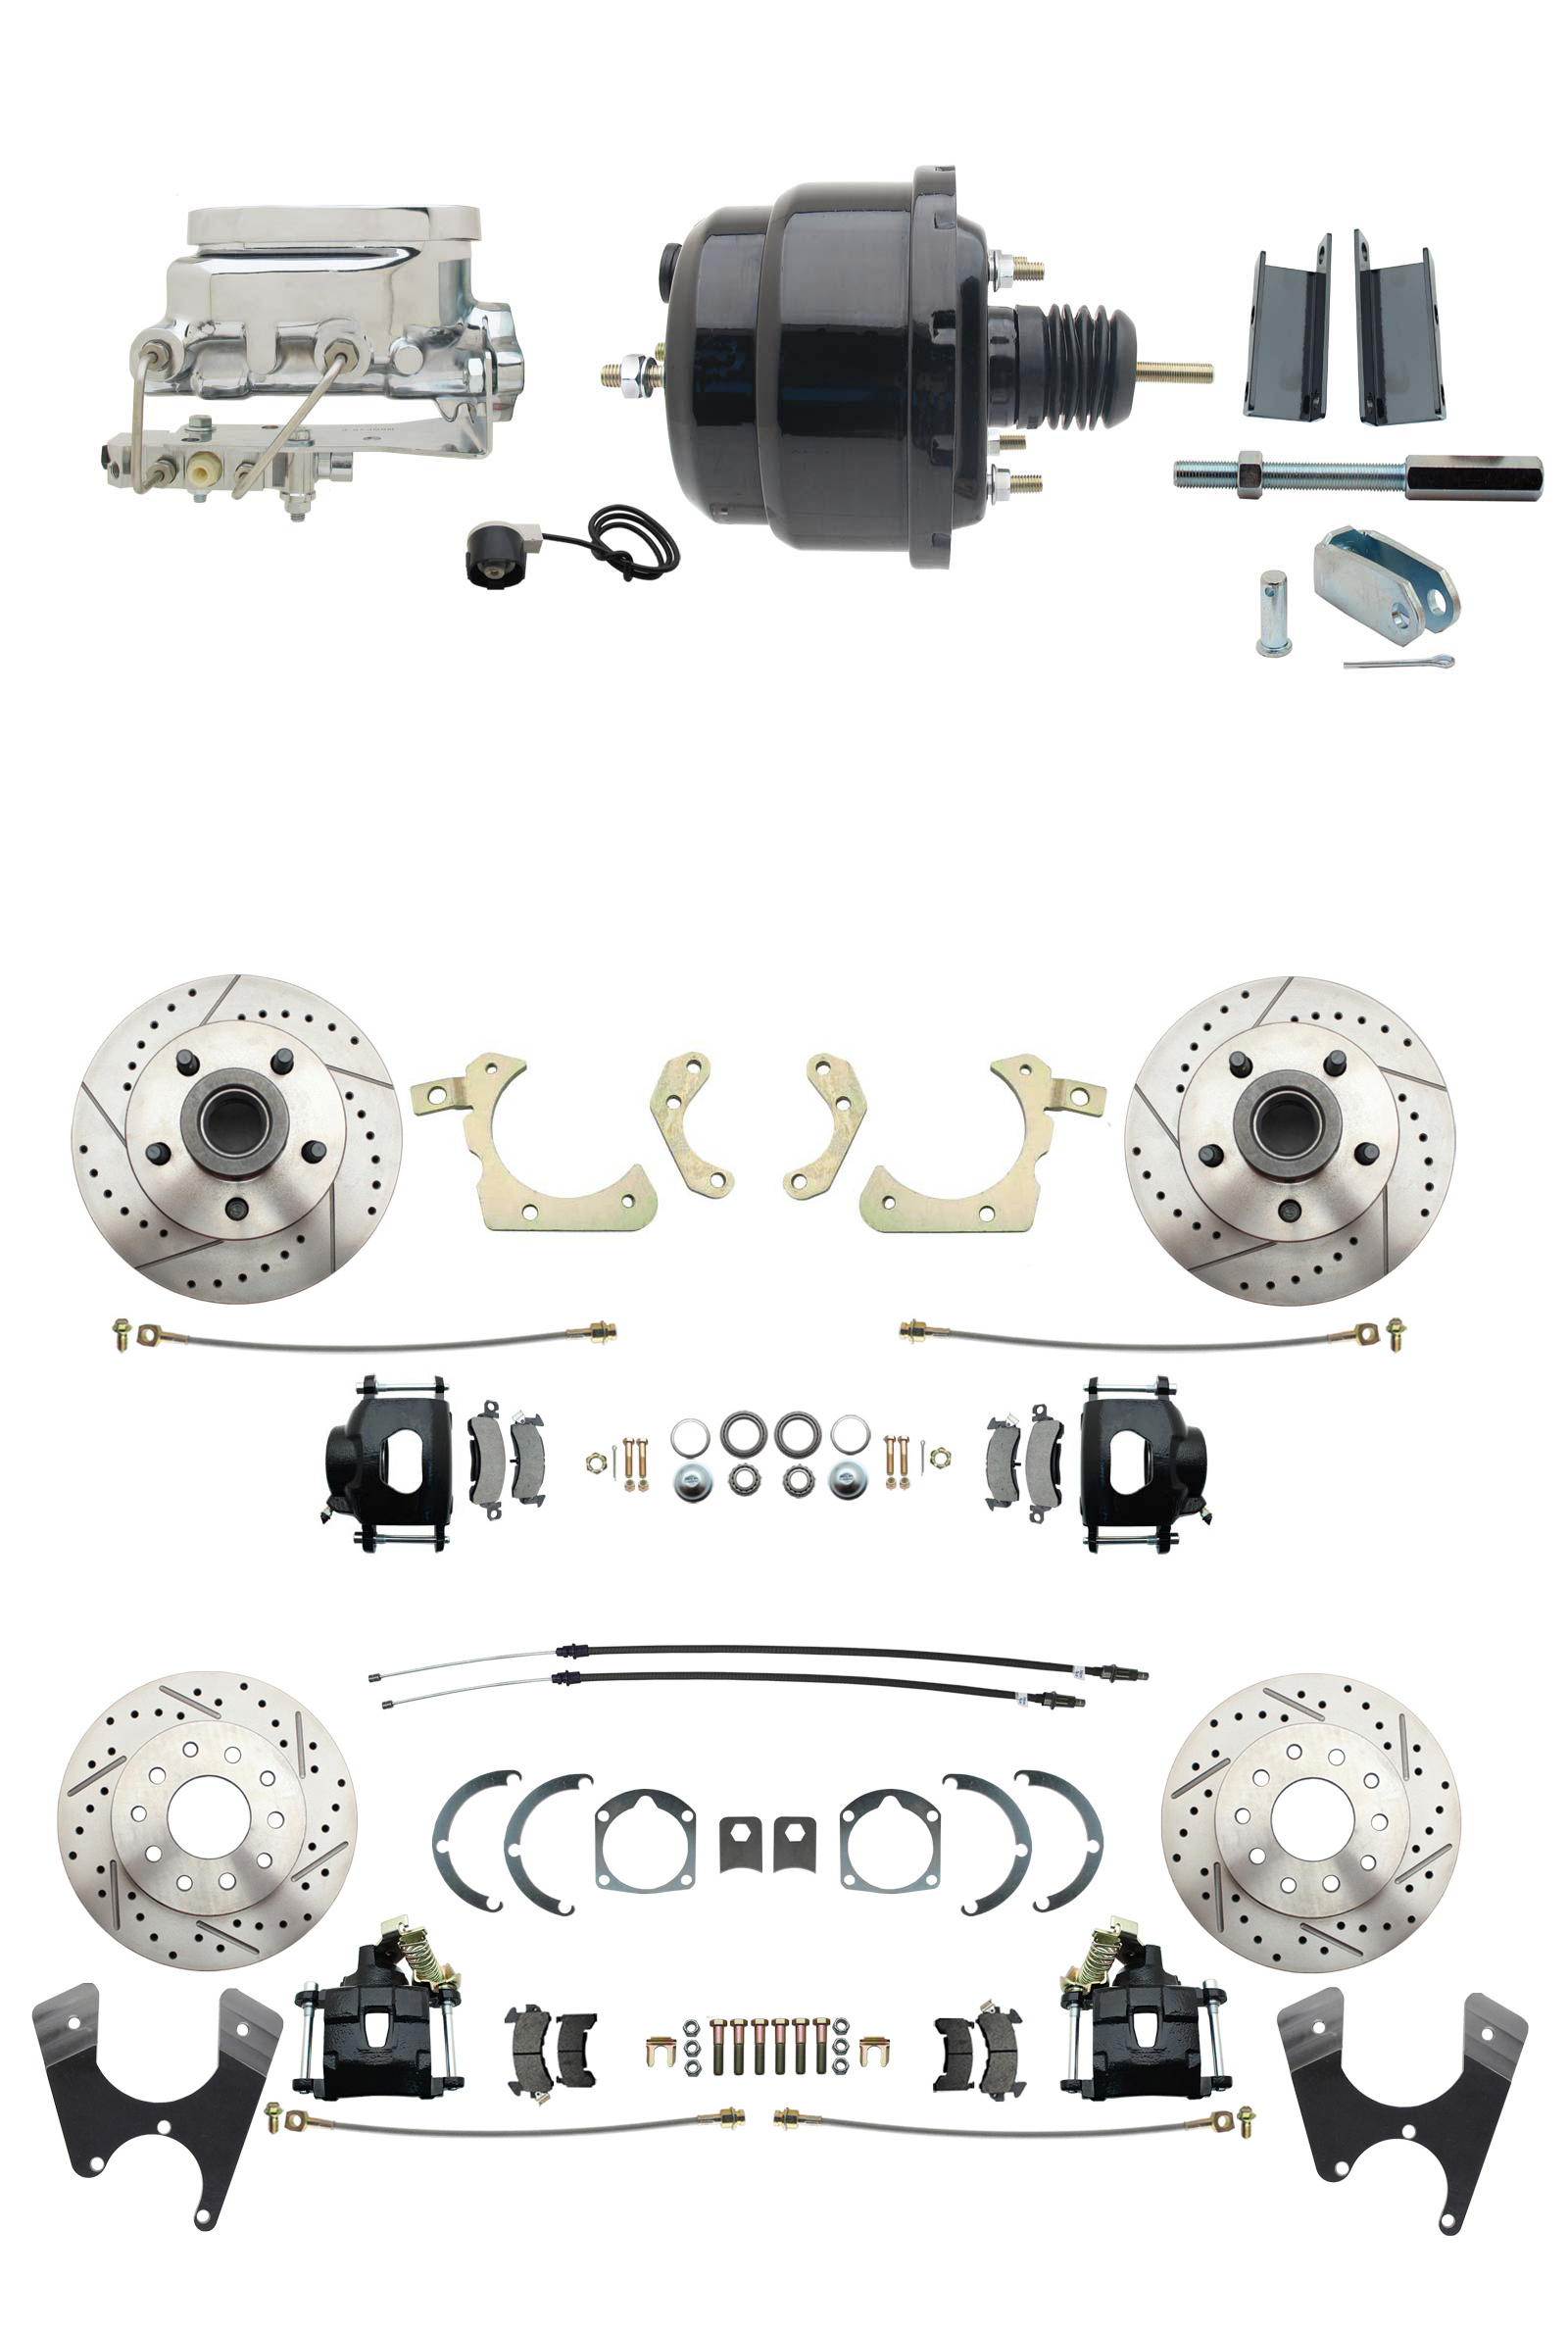 1955-1958 GM Full Size Front & Rear Power Disc Brake Kit Black Powder Coated Calipers Drilled/Slotted Rotors (Impala, Bel Air, Biscayne) & 8 Dual Powder Coated Black Booster Conversion Kit W/ Chrome Flat Top Master Cyli